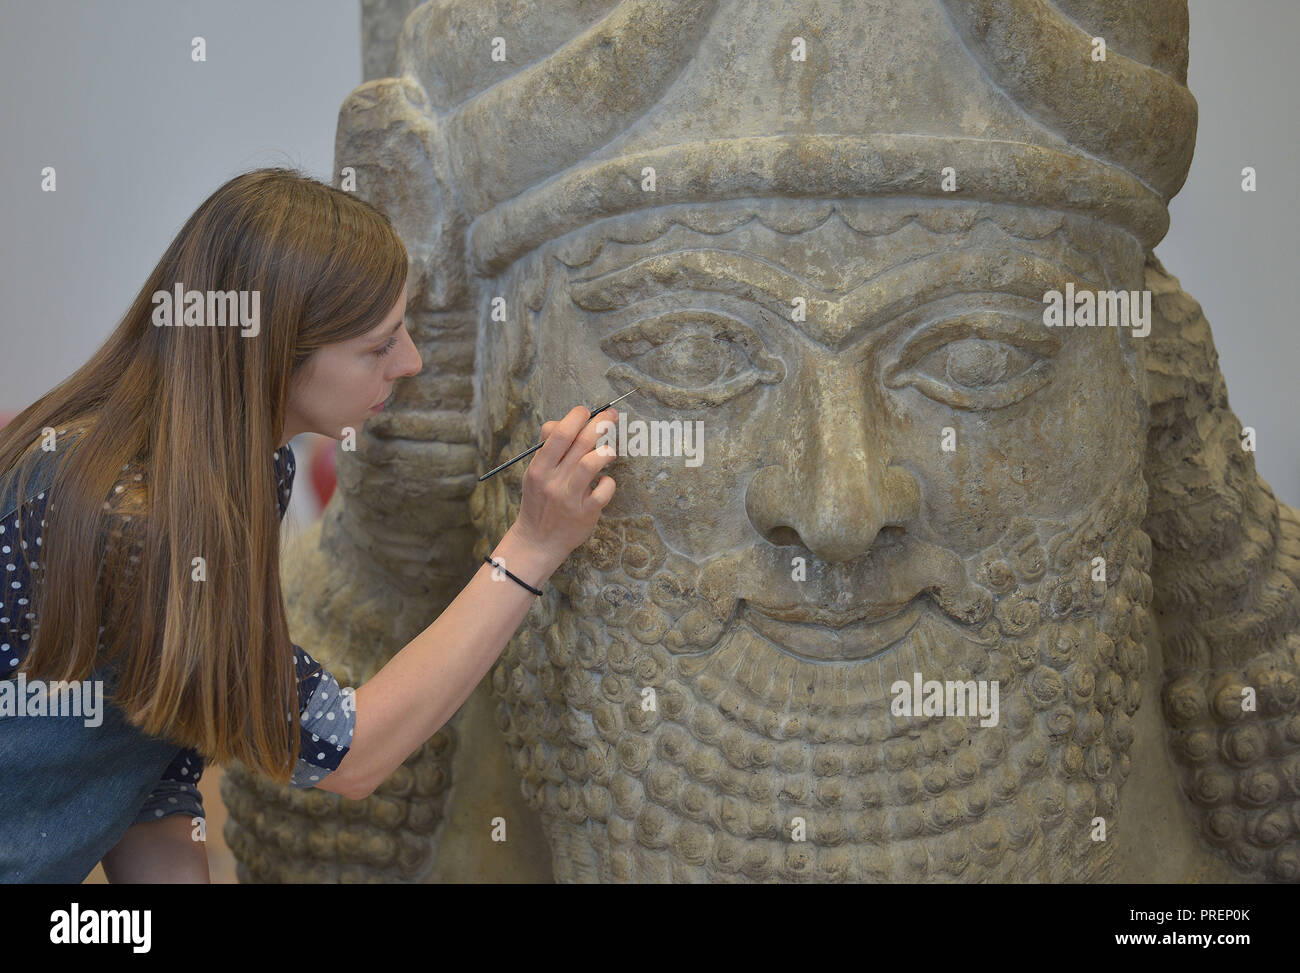 British Museum stone conservator Kasia Weglowska, prepares a head of an Assyrian winged bull, from the palace of Ashurbanipal's father, Esarhaddon, at Nimrud 670BC. The head weighing 1.8 tonnes is part of the final installations for the I Am Ashurbanipal: king of the world, king of Assyria, exhibition at the British Museum, London, which opens on 8 November 2018. Stock Photo